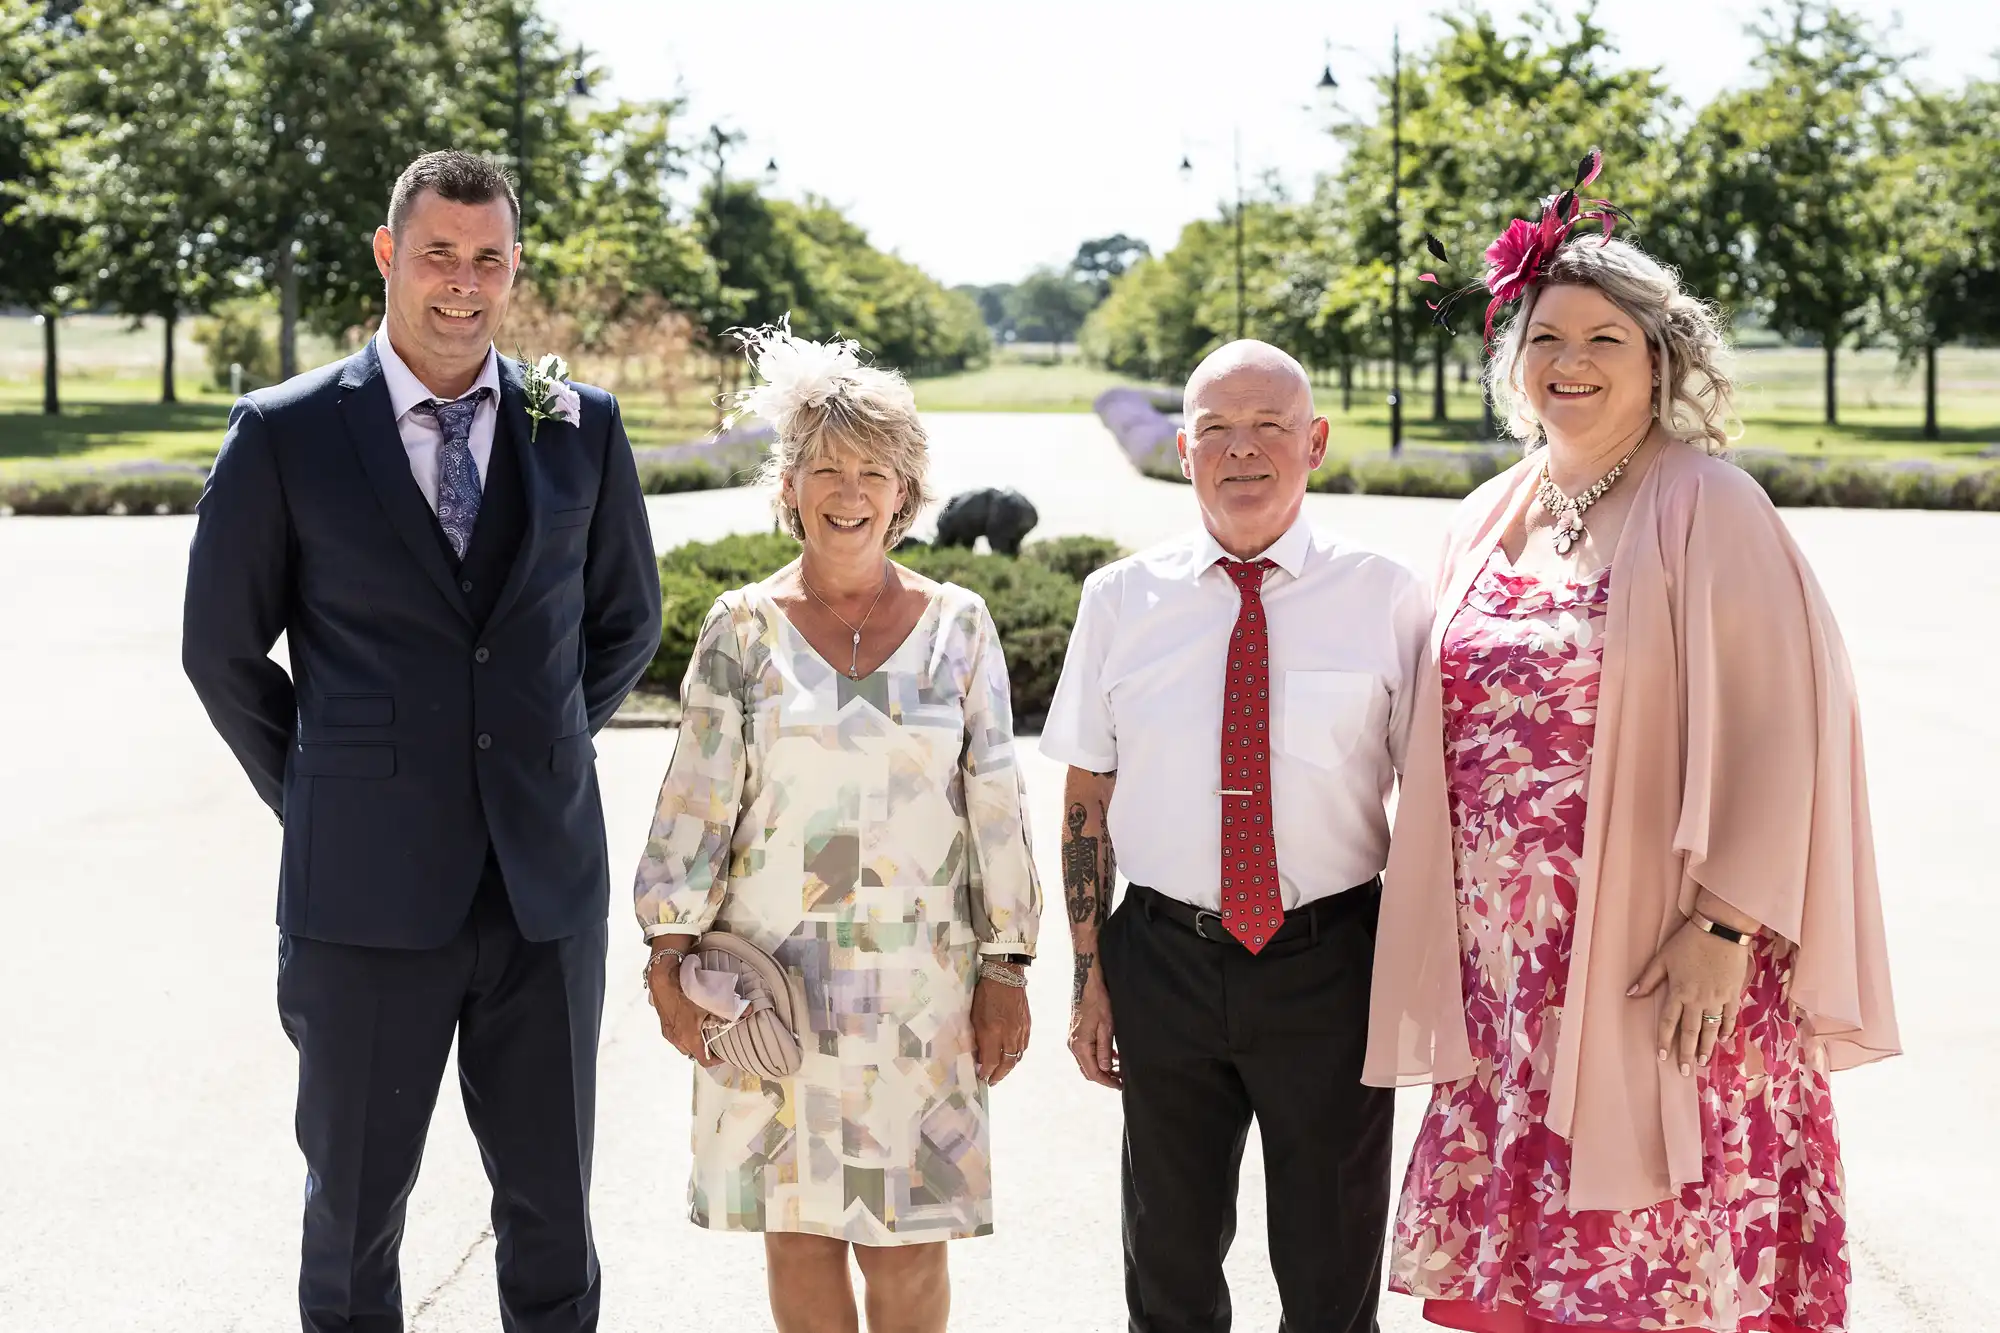 Four adults dressed in formal wear, smiling outside on a sunny day, with a park pathway and trees in the background.